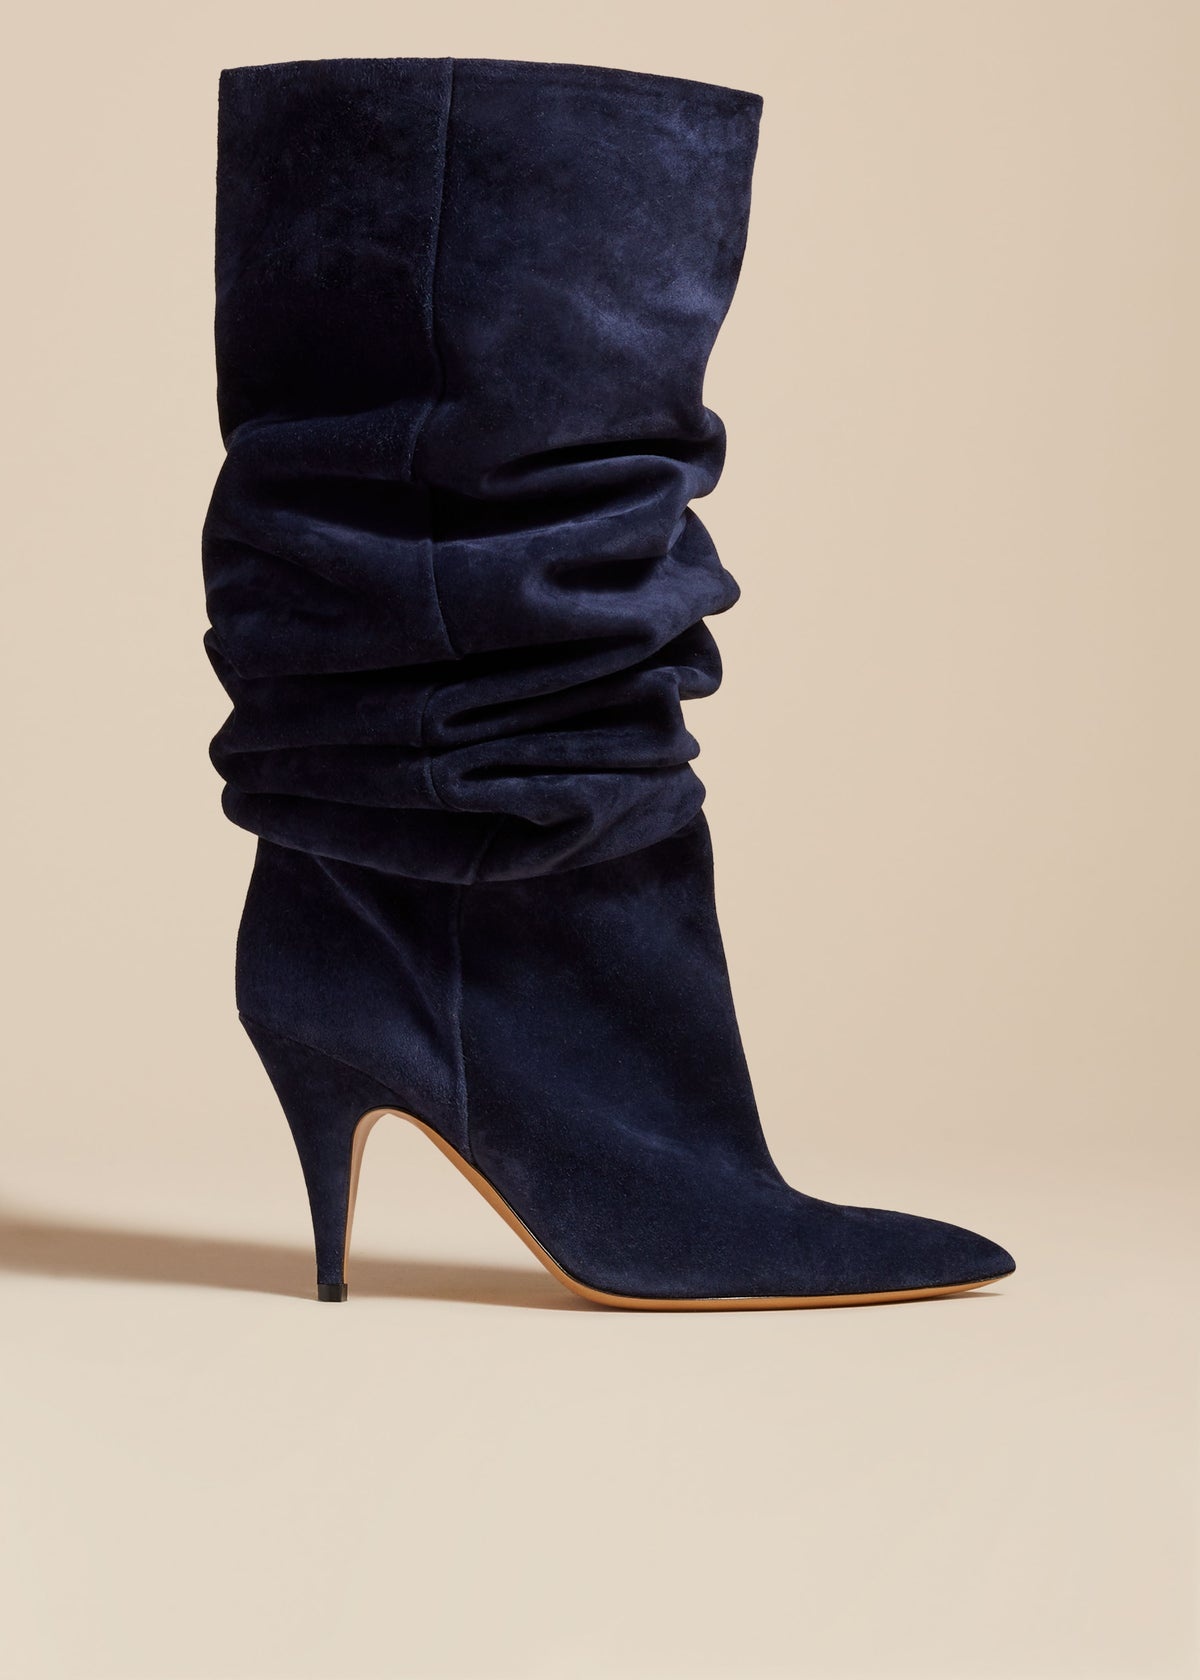 The River Knee-High Boot in Midnight Suede - 1